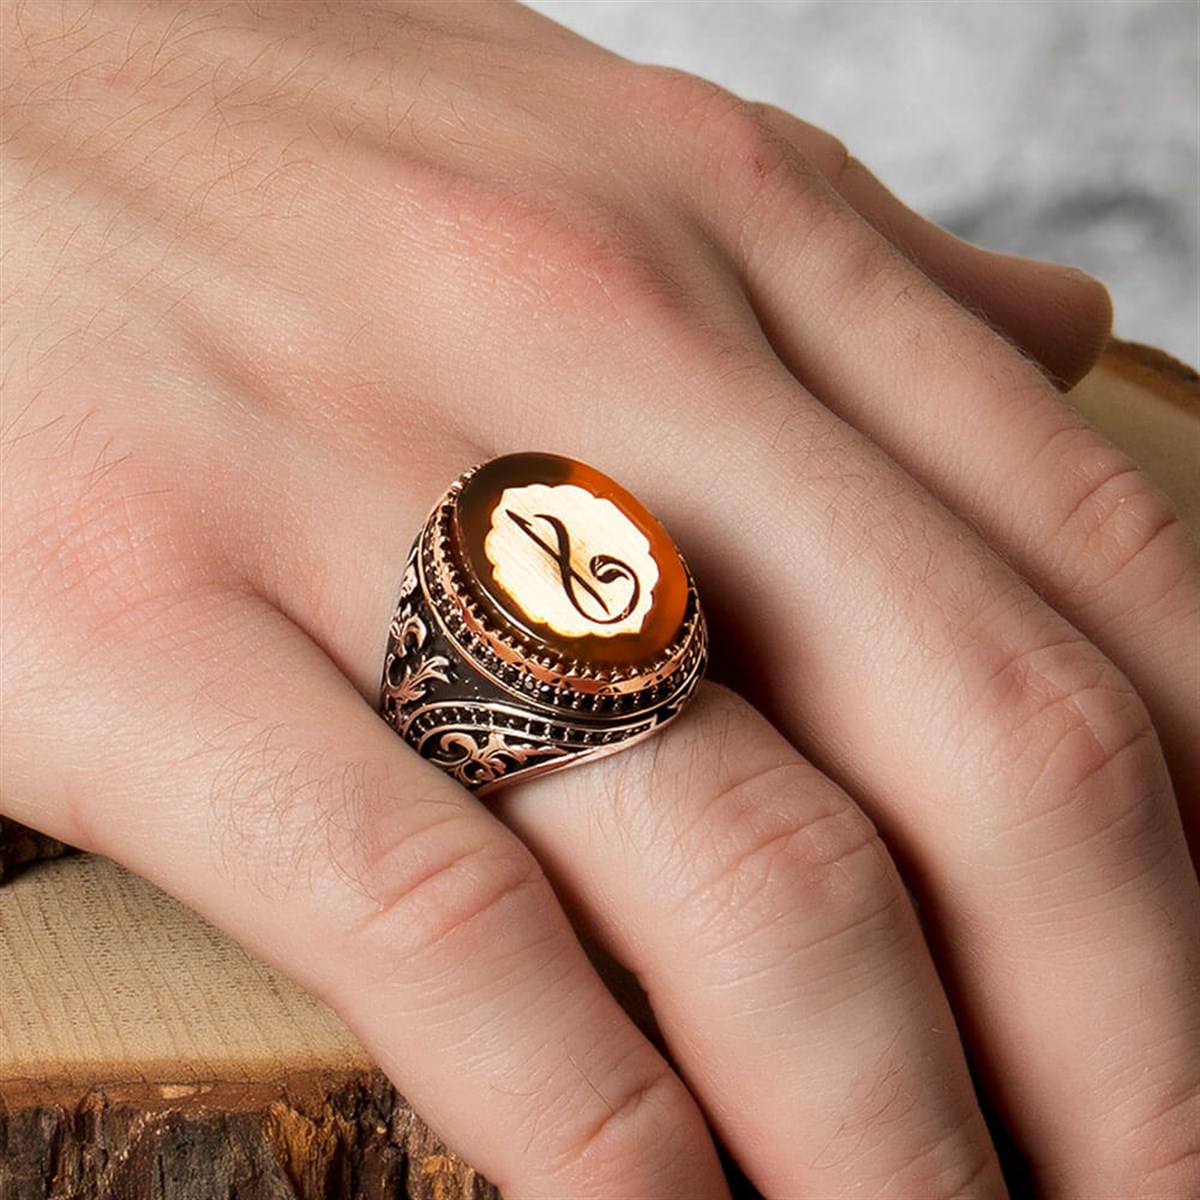 Silver Ring with Amber Stone with Elif Vav Motif - Vav Silver